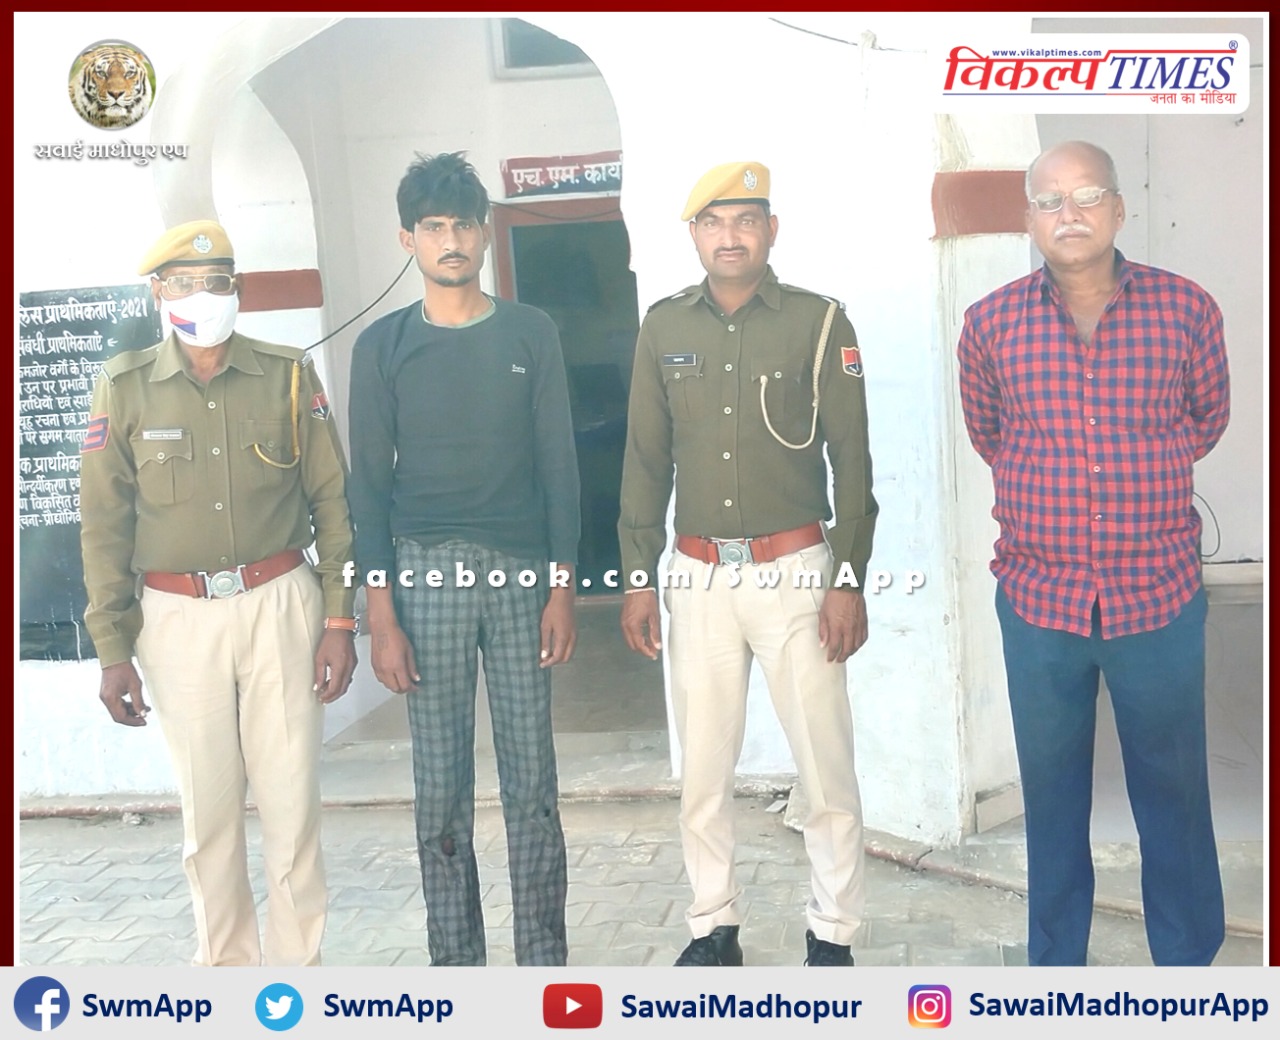 Police arrested accused of theft at Triveni Sangam Rameshwar Dham in sawai madhopur